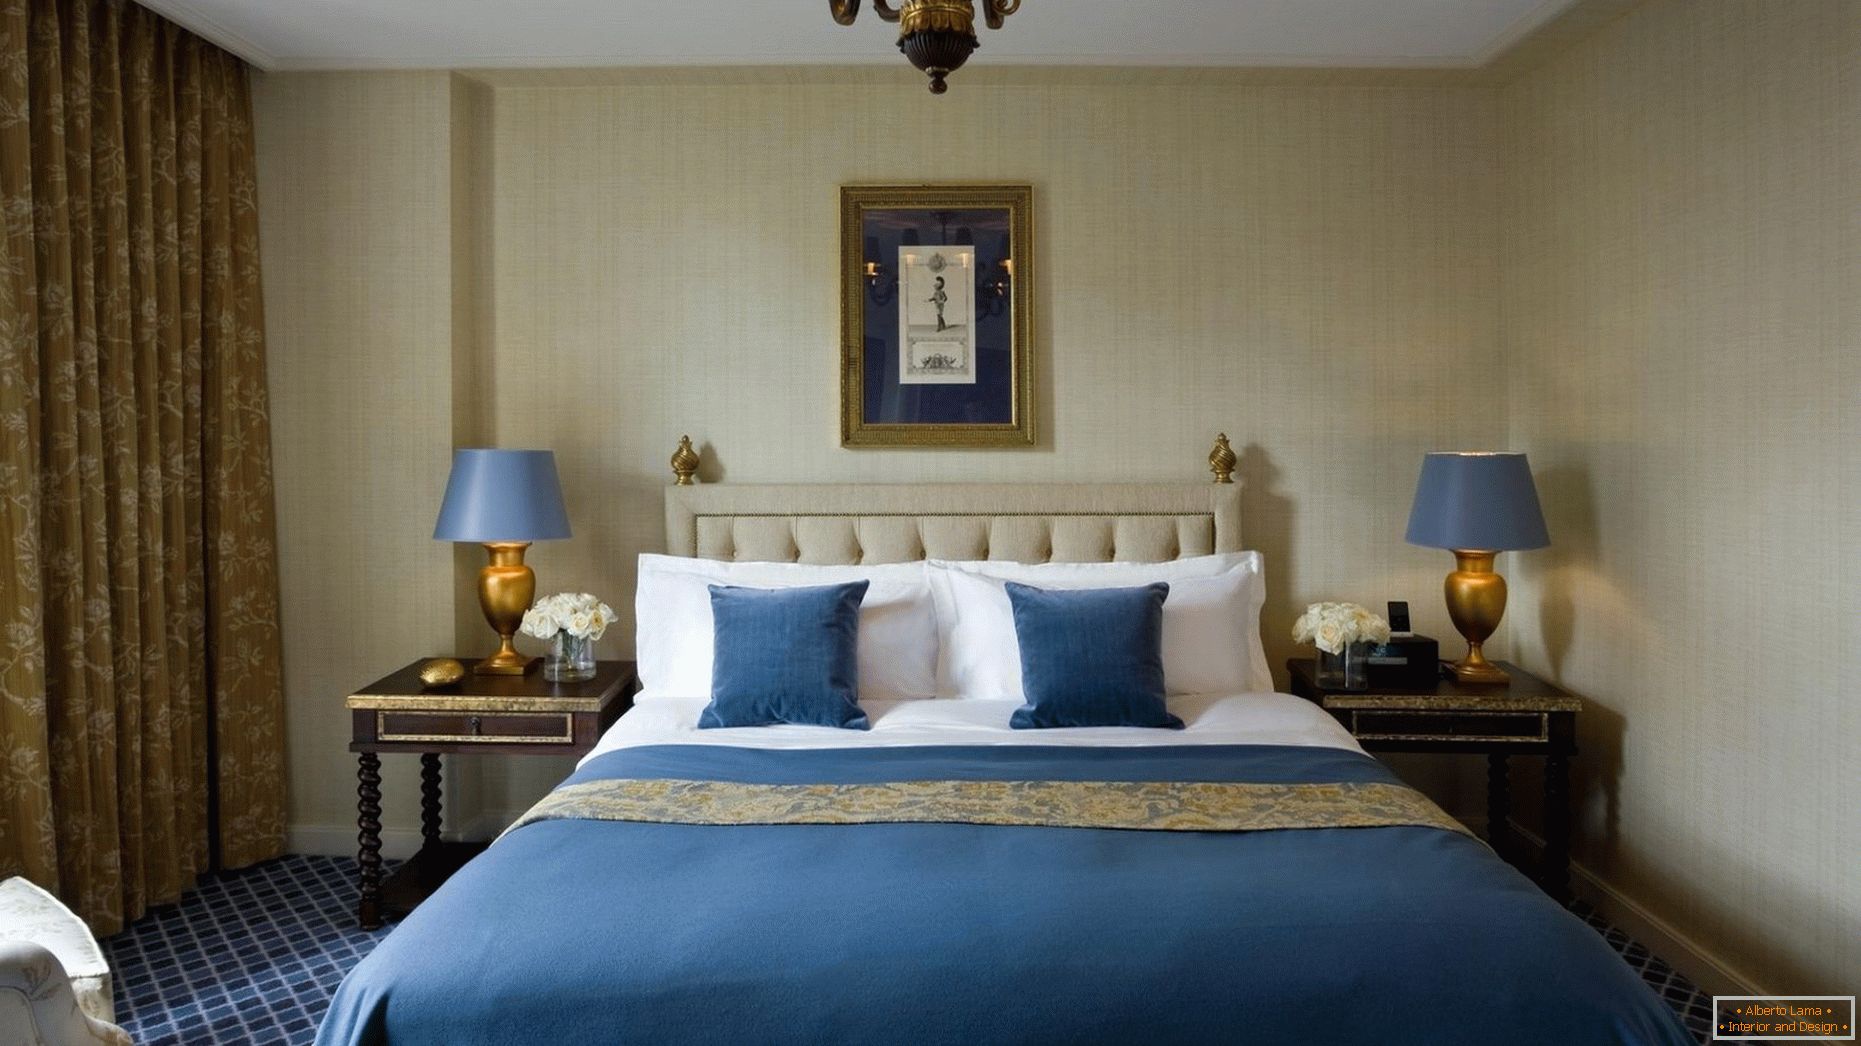 Blue and gold shades in the interior of the bedroom